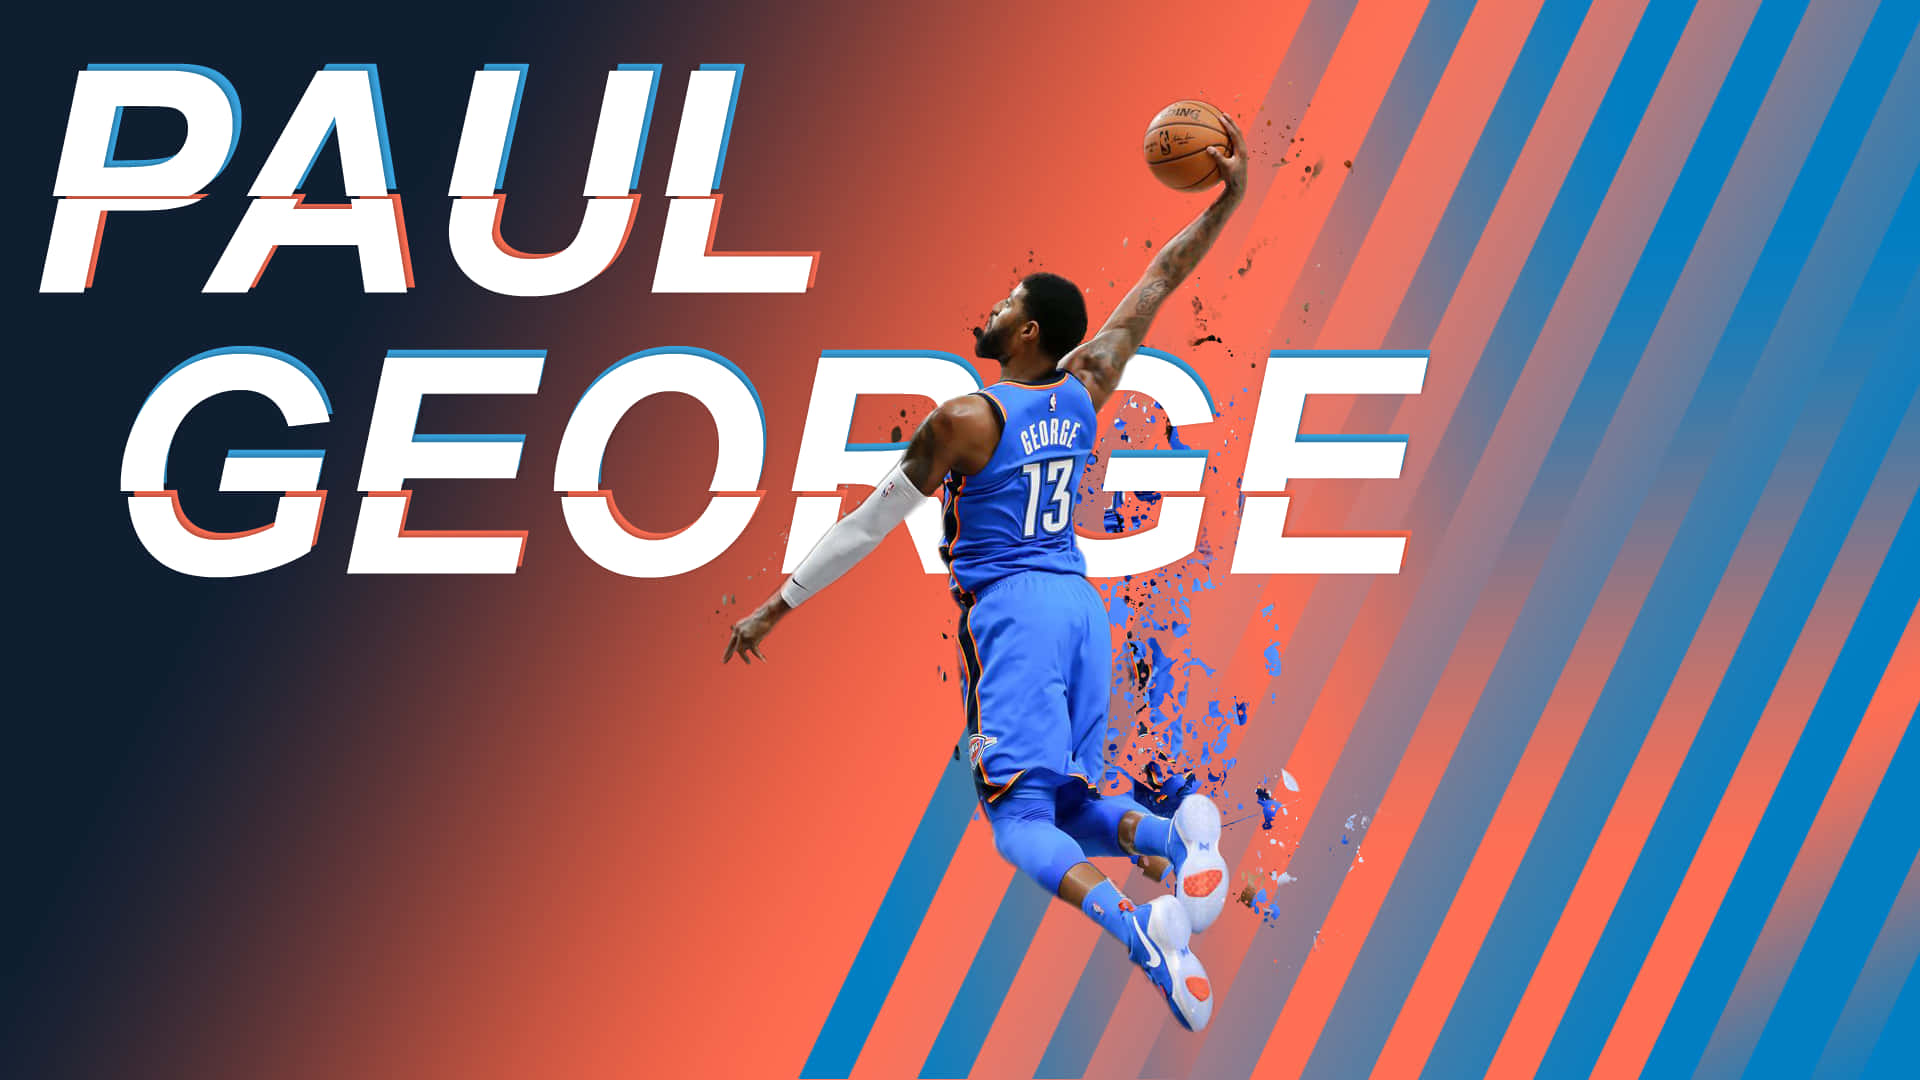 Paul George Clippers Poster Wallpaper